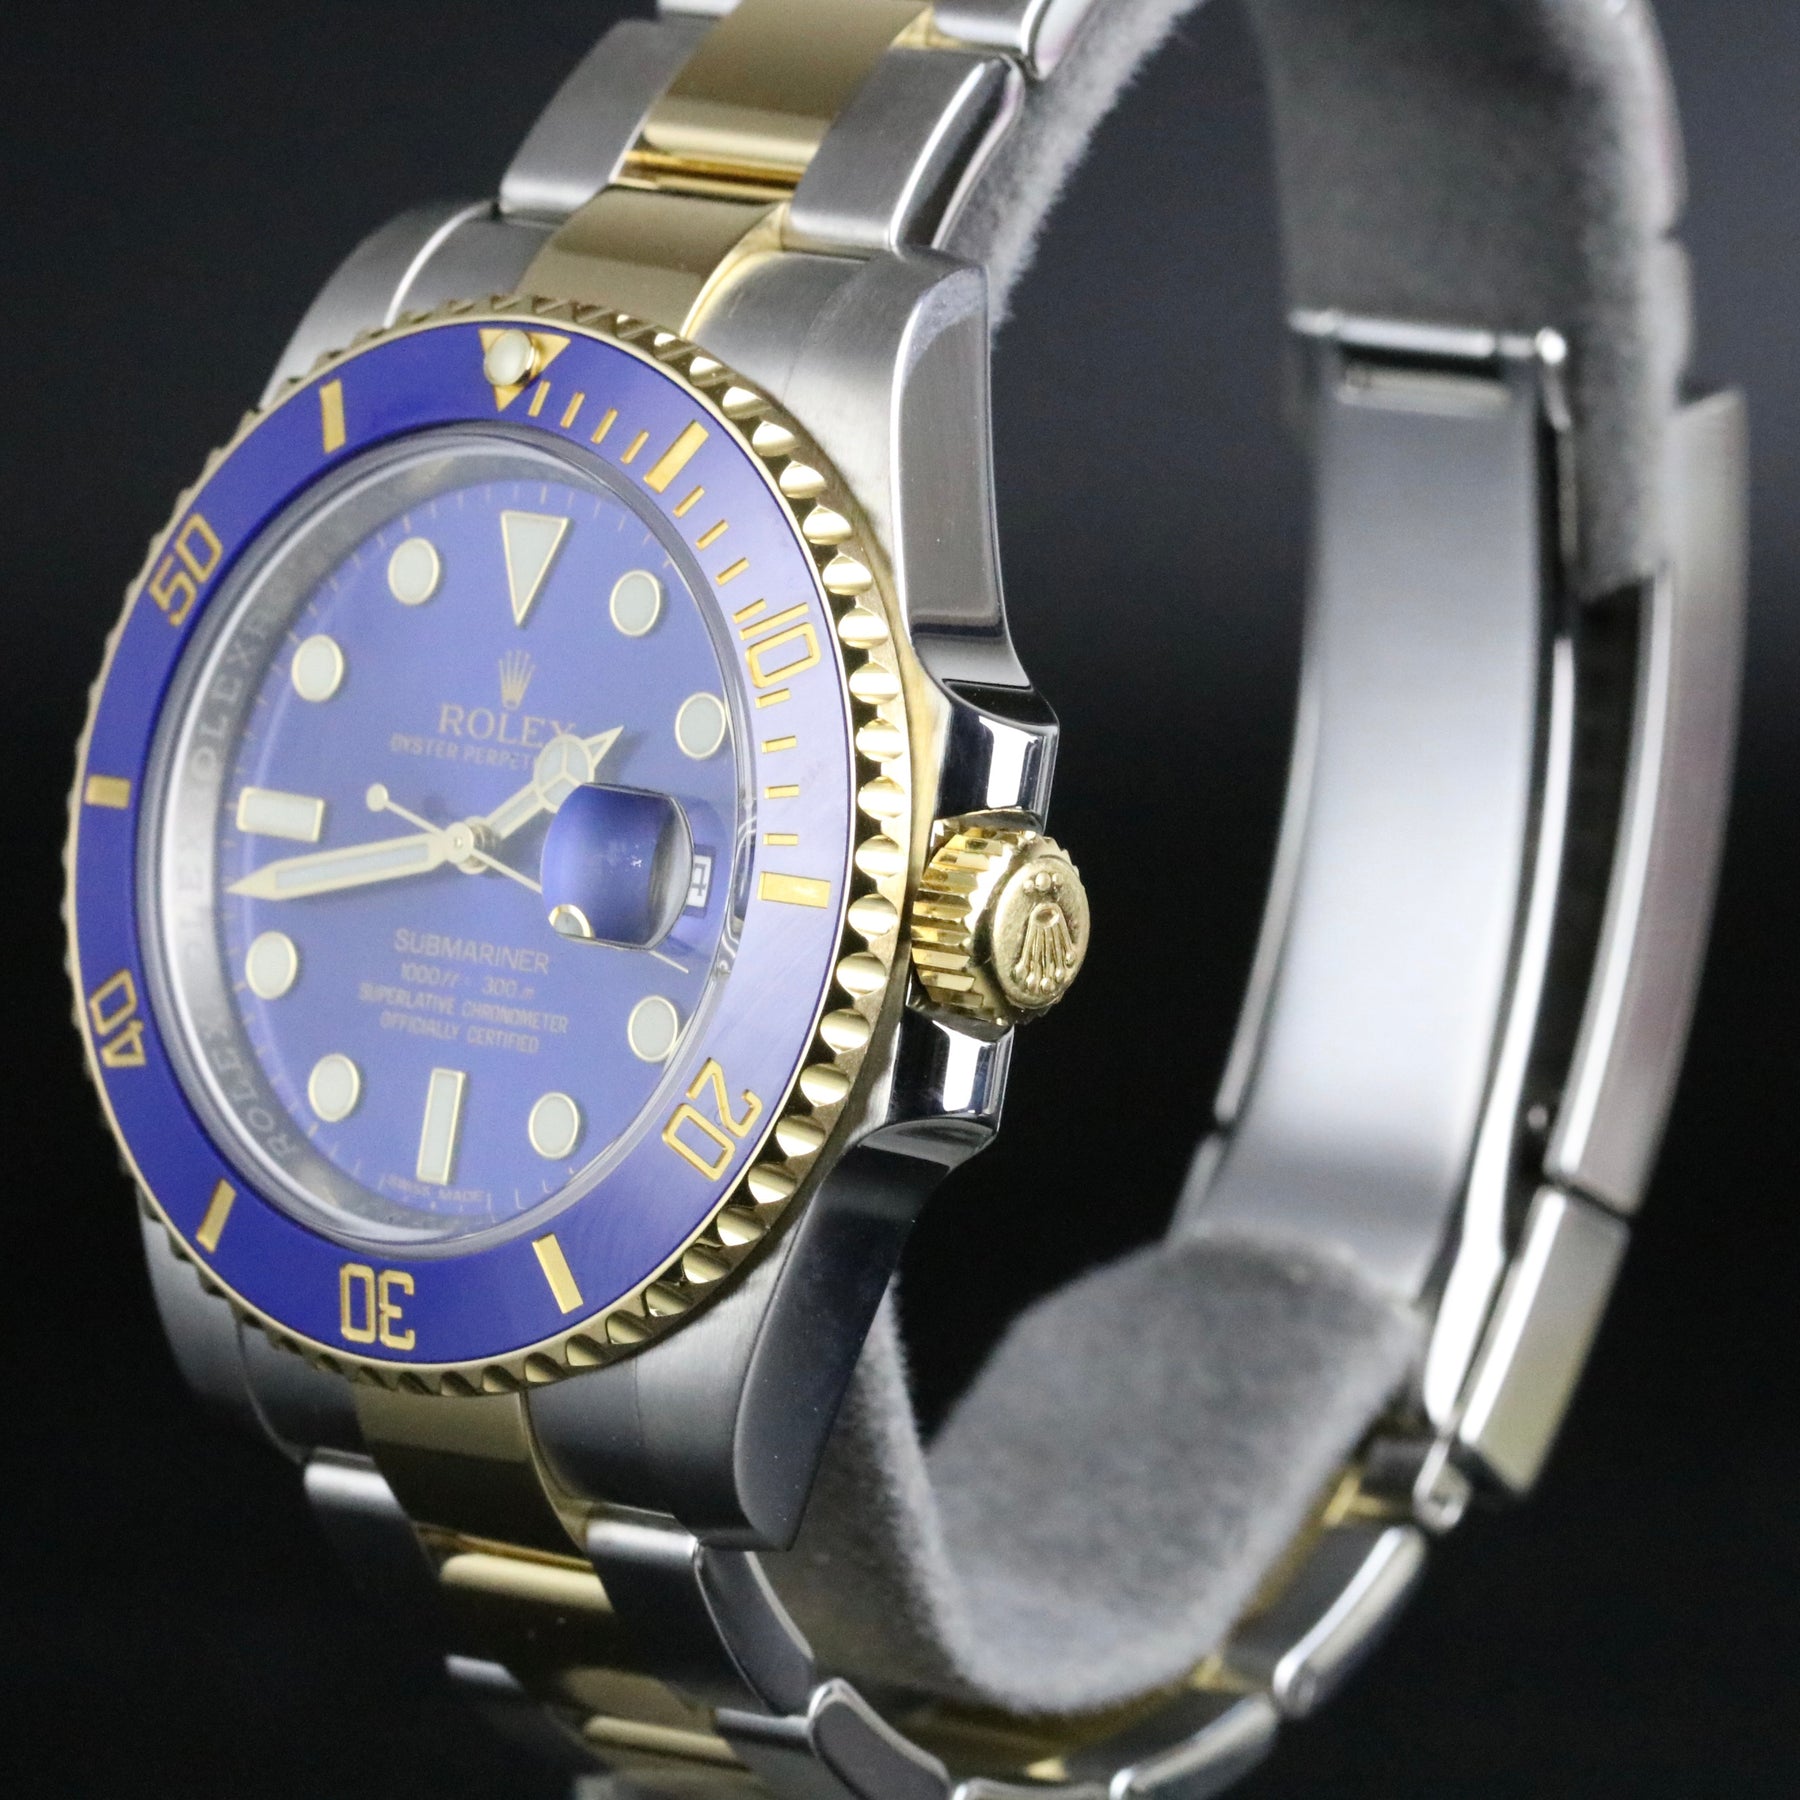 2017 Rolex 116613LB Submariner 40mm Blue Ceramic Bezel with Box & Papers